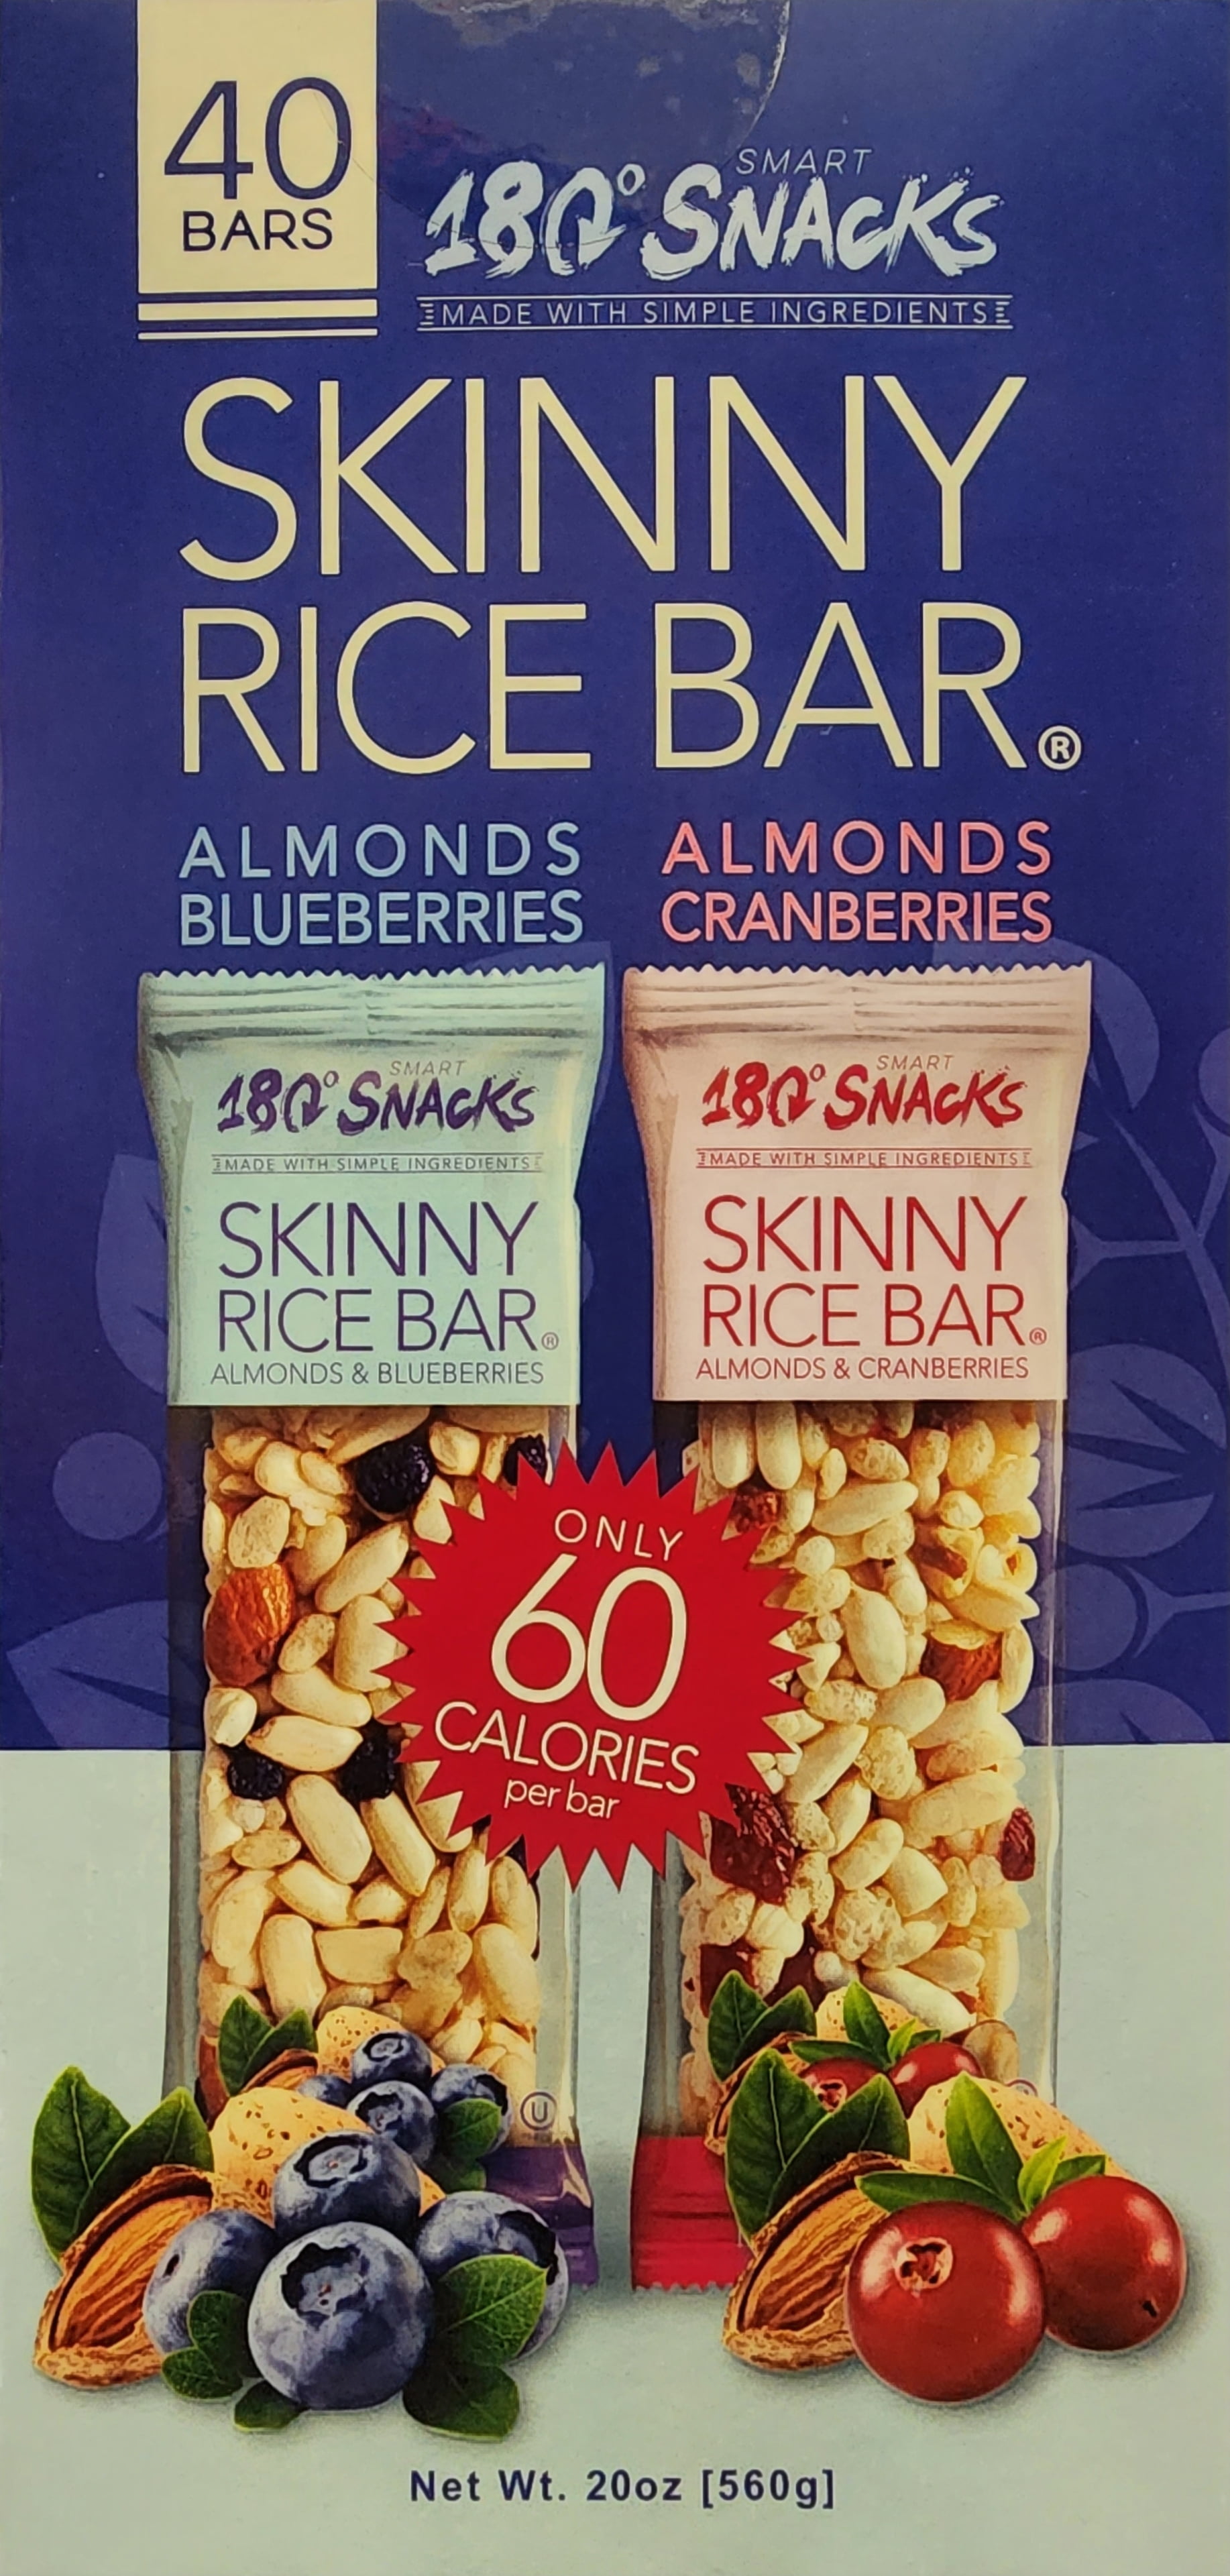 Skinny Rice Bar with Blueberries, Almonds, and Himalayan Salt (14 count)